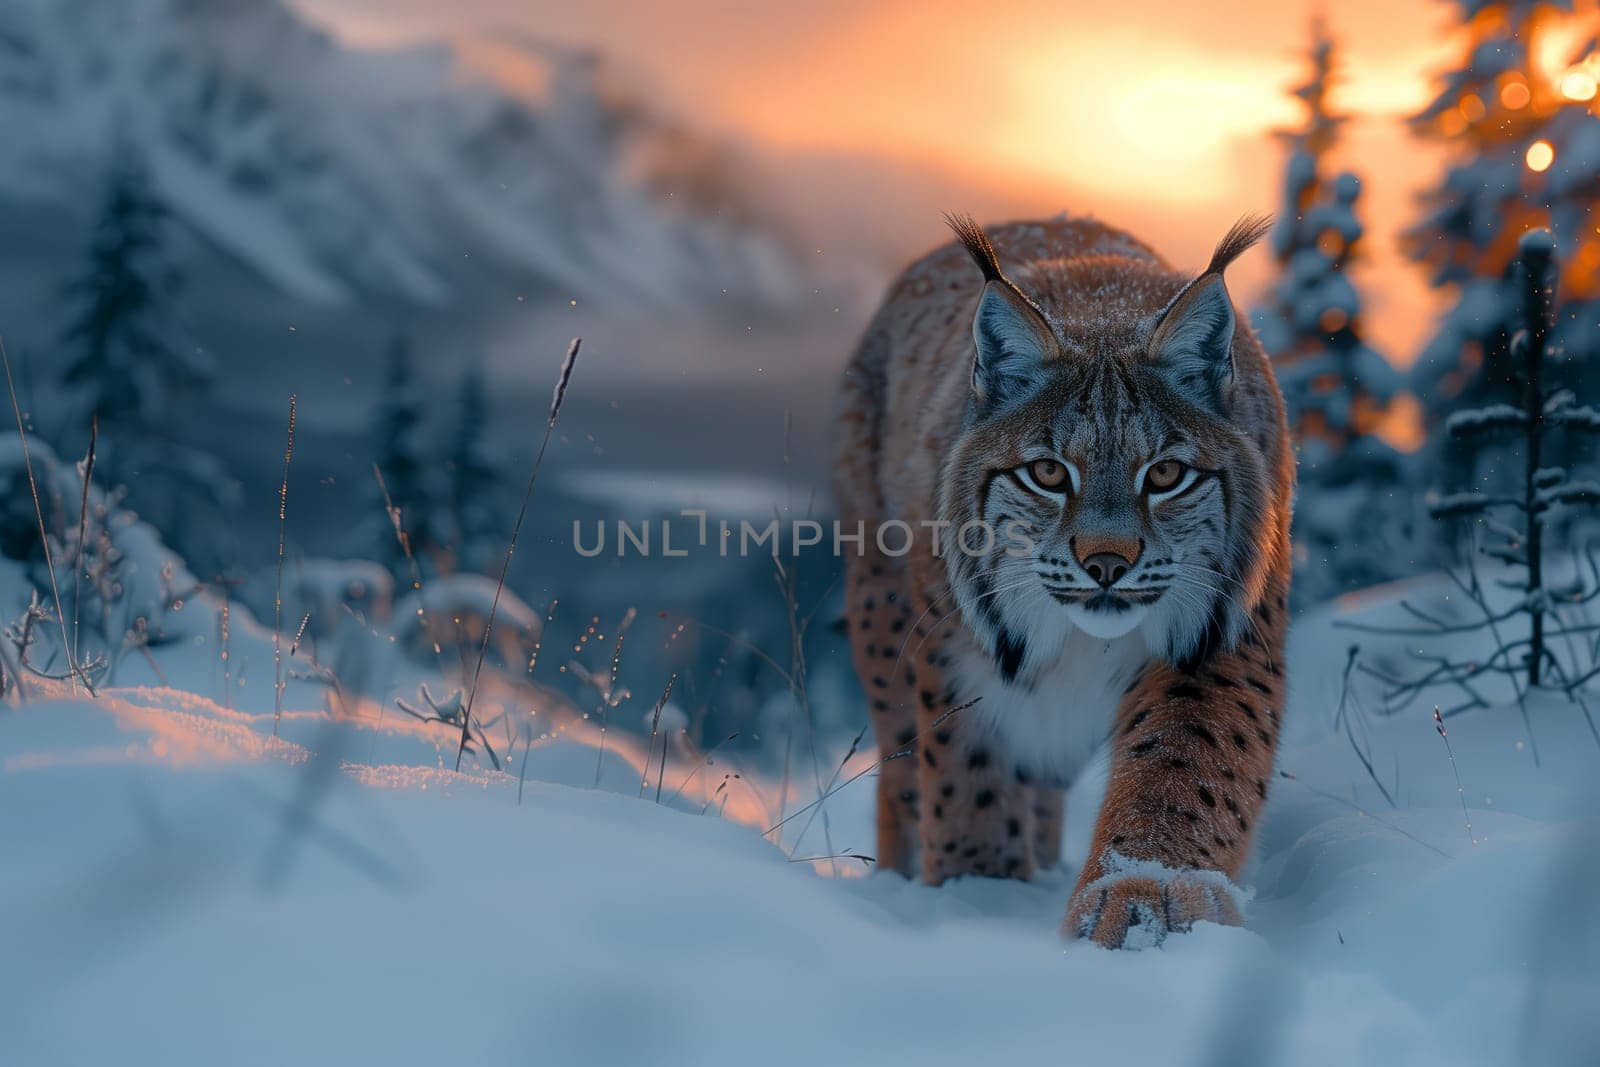 A Felidae Lynx, a carnivorous cat, is gracefully walking through the snowy landscape at sunset under the colorful sky with scattered clouds